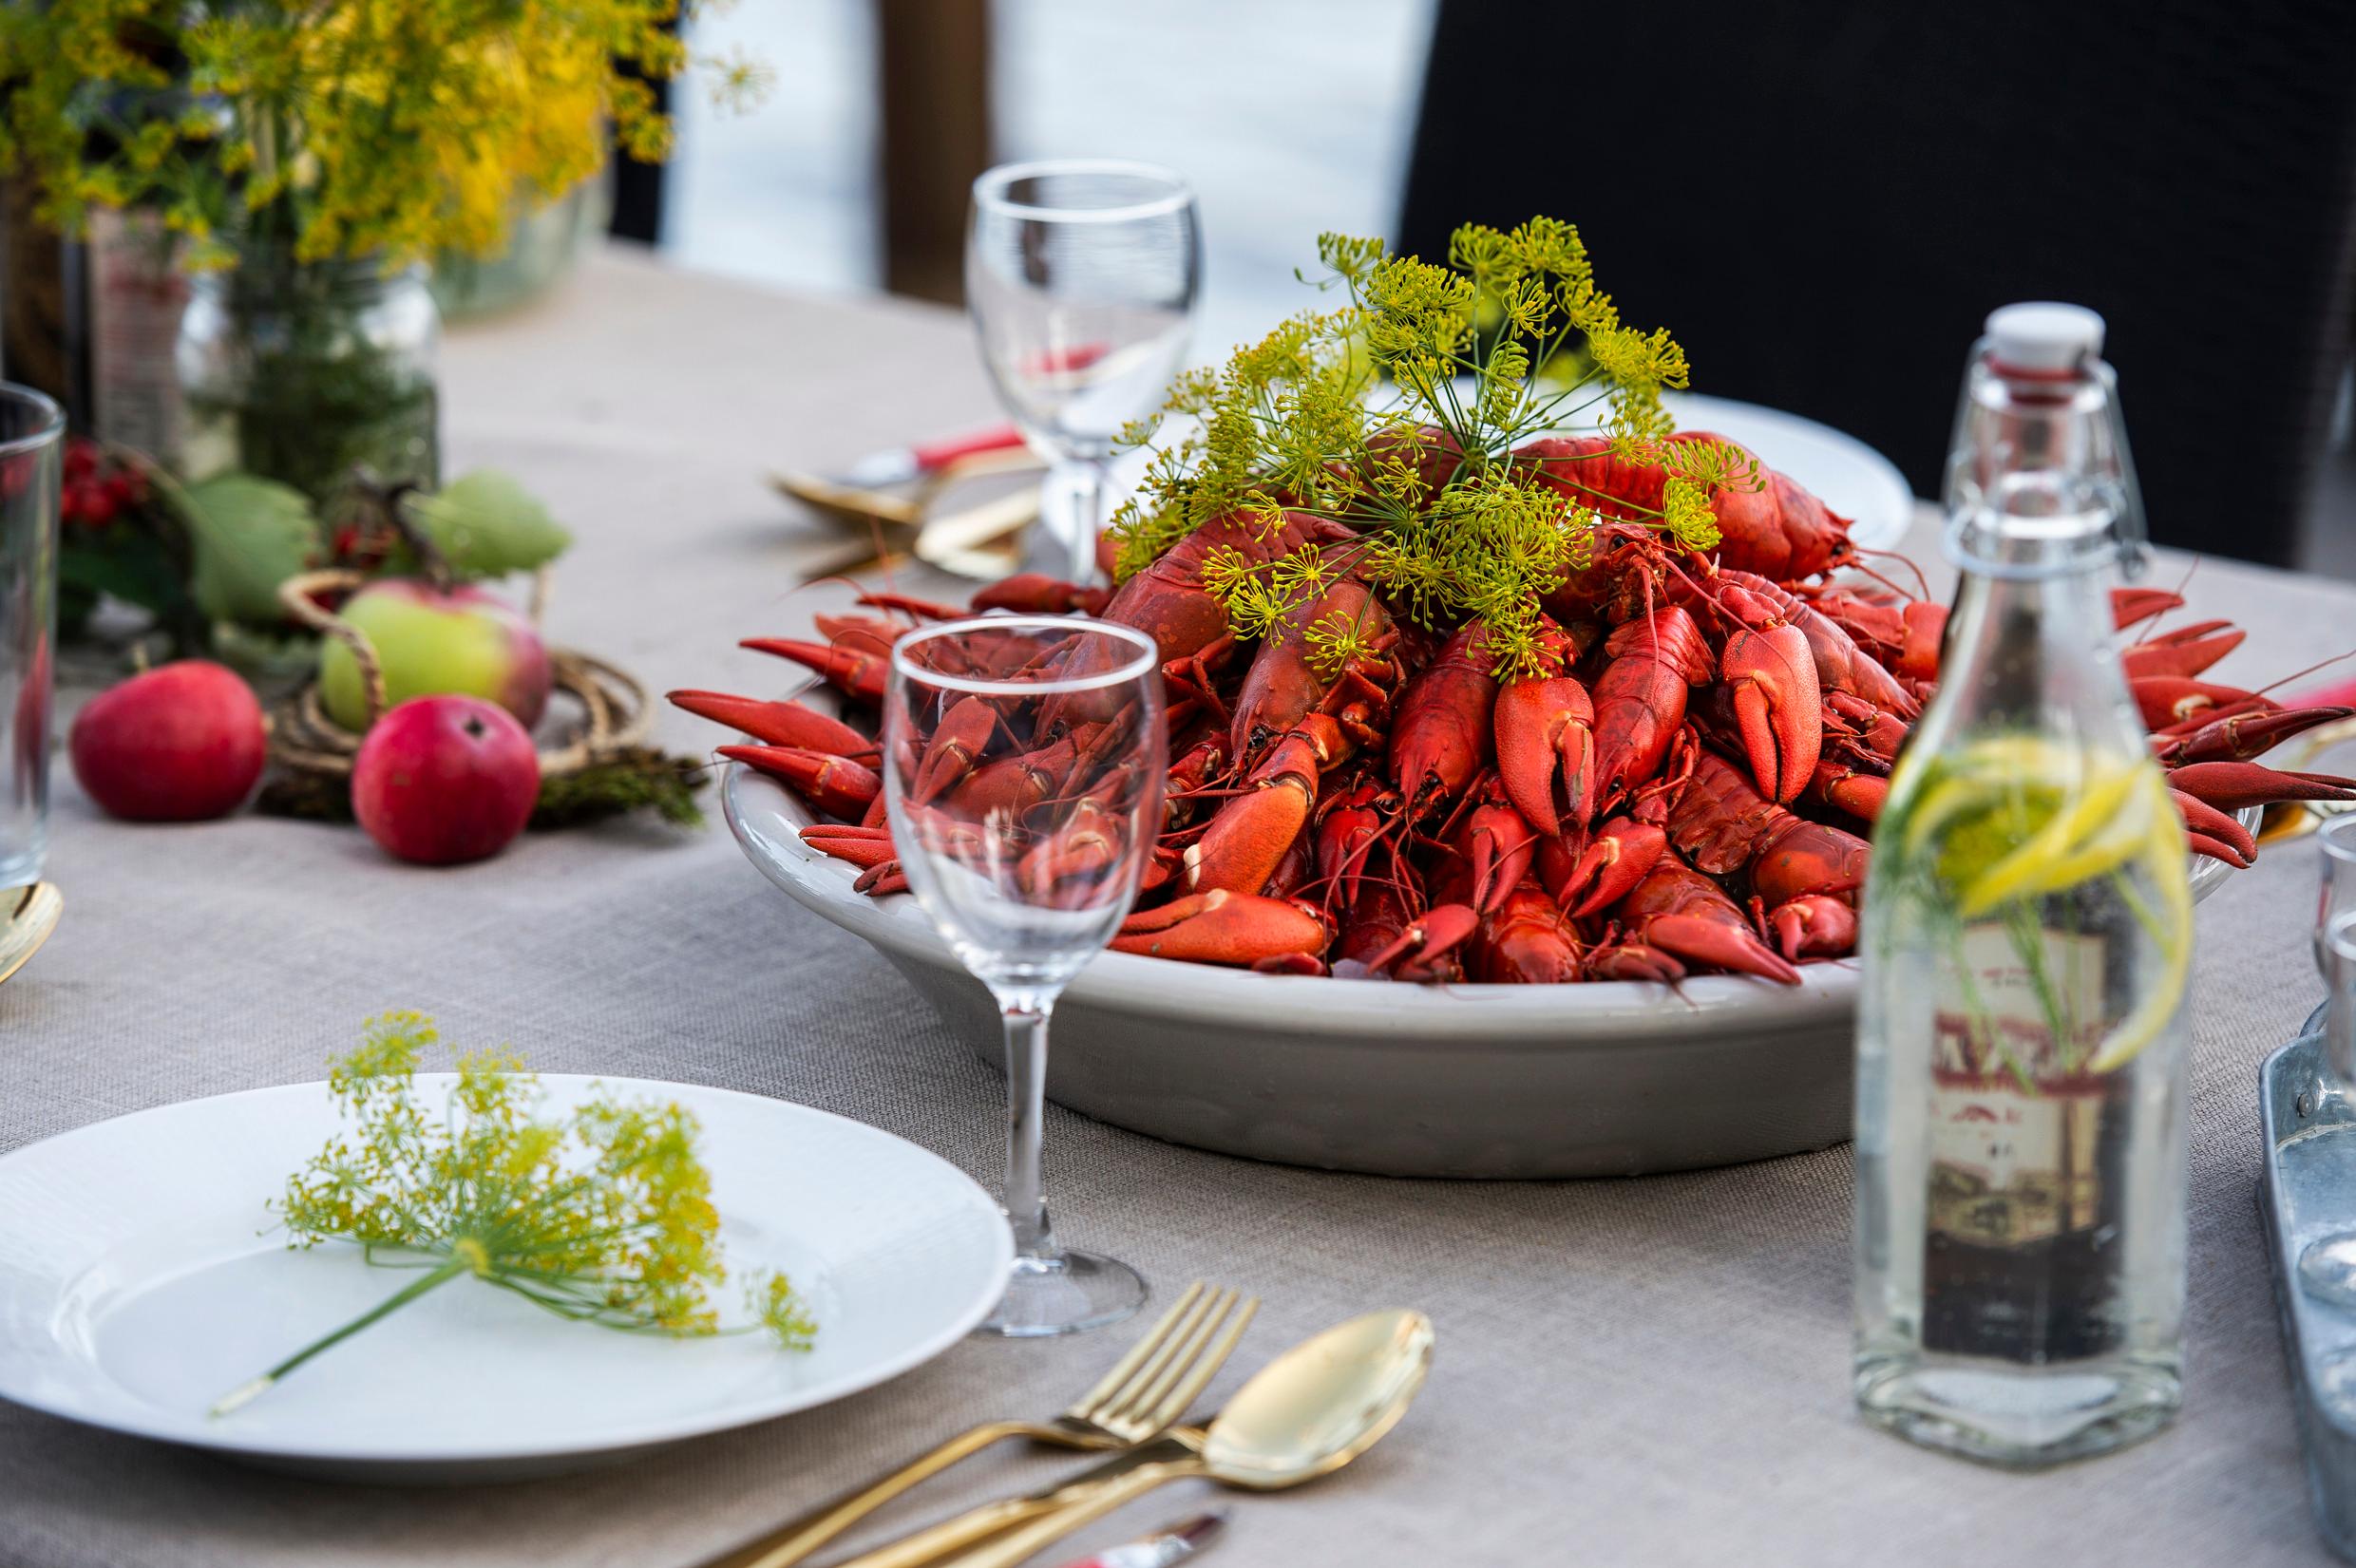 A heap of crayfish in a bowl on a nicely decorated table.